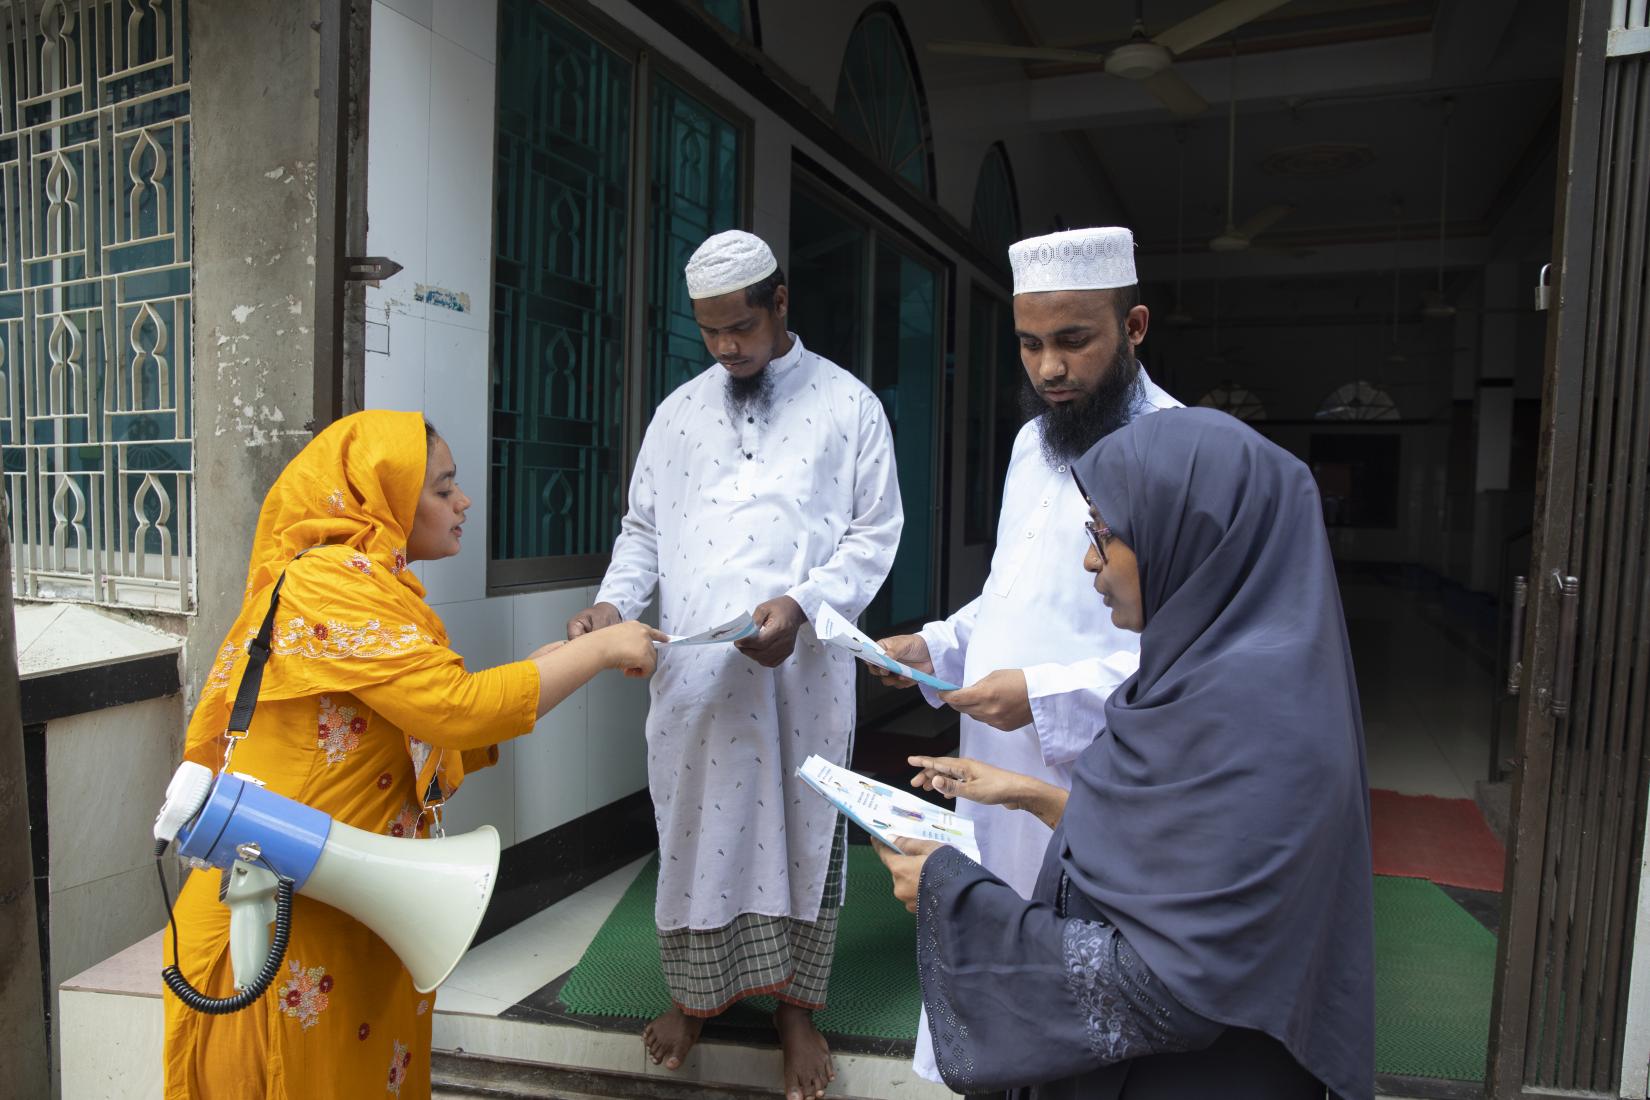 Tahmina Begum, a Community Volunteer, speaks to Imams at the mosque, along with community members, about dengue prevention in Dhalpur, Dhaka